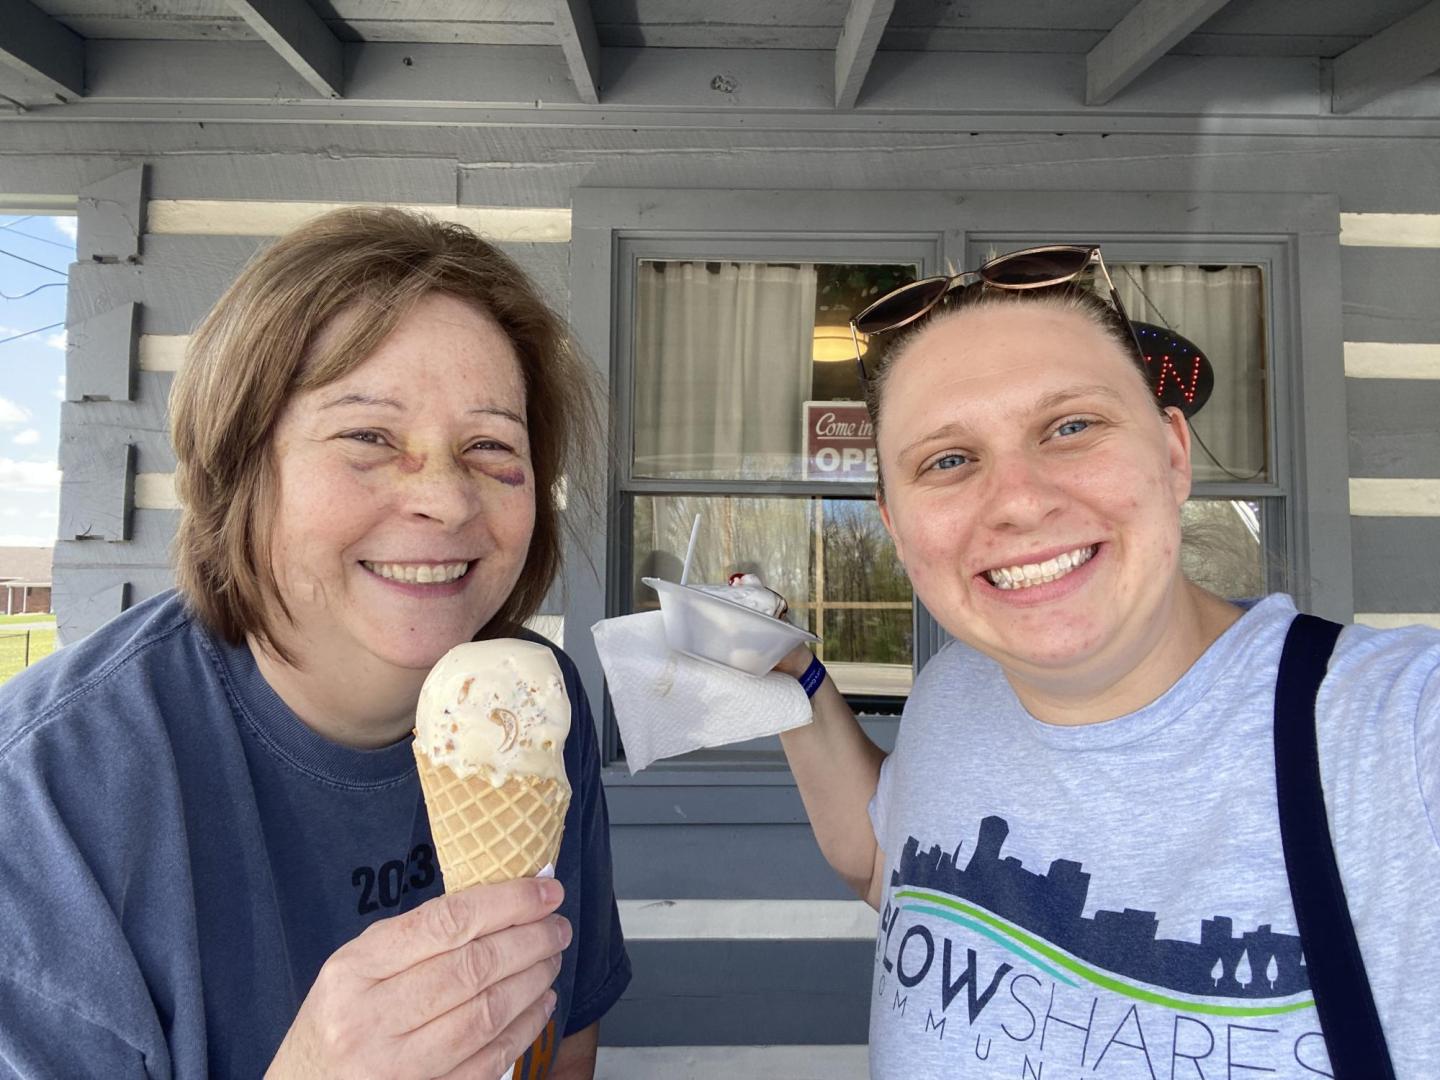 Two women take a selfie together. They are both holding ice cream